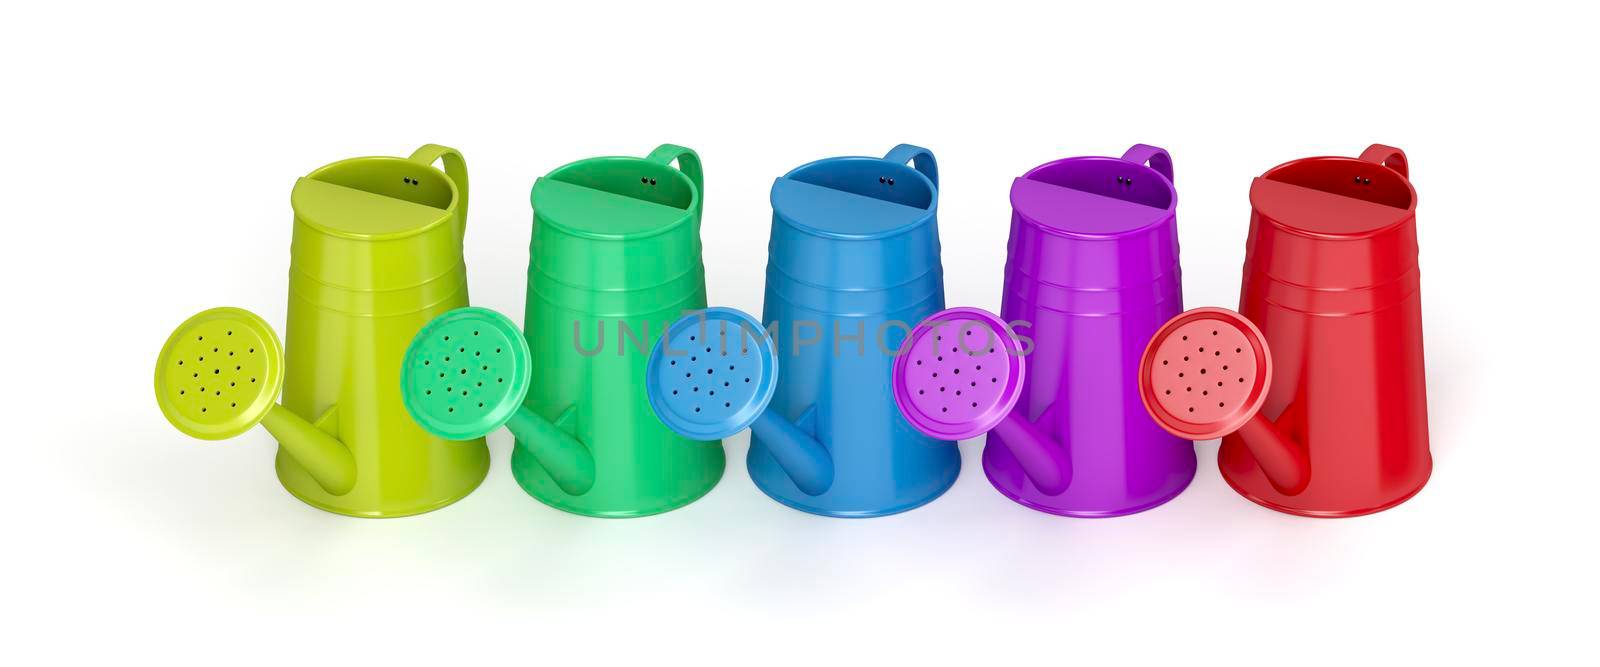 Row with colorful watering cans by magraphics